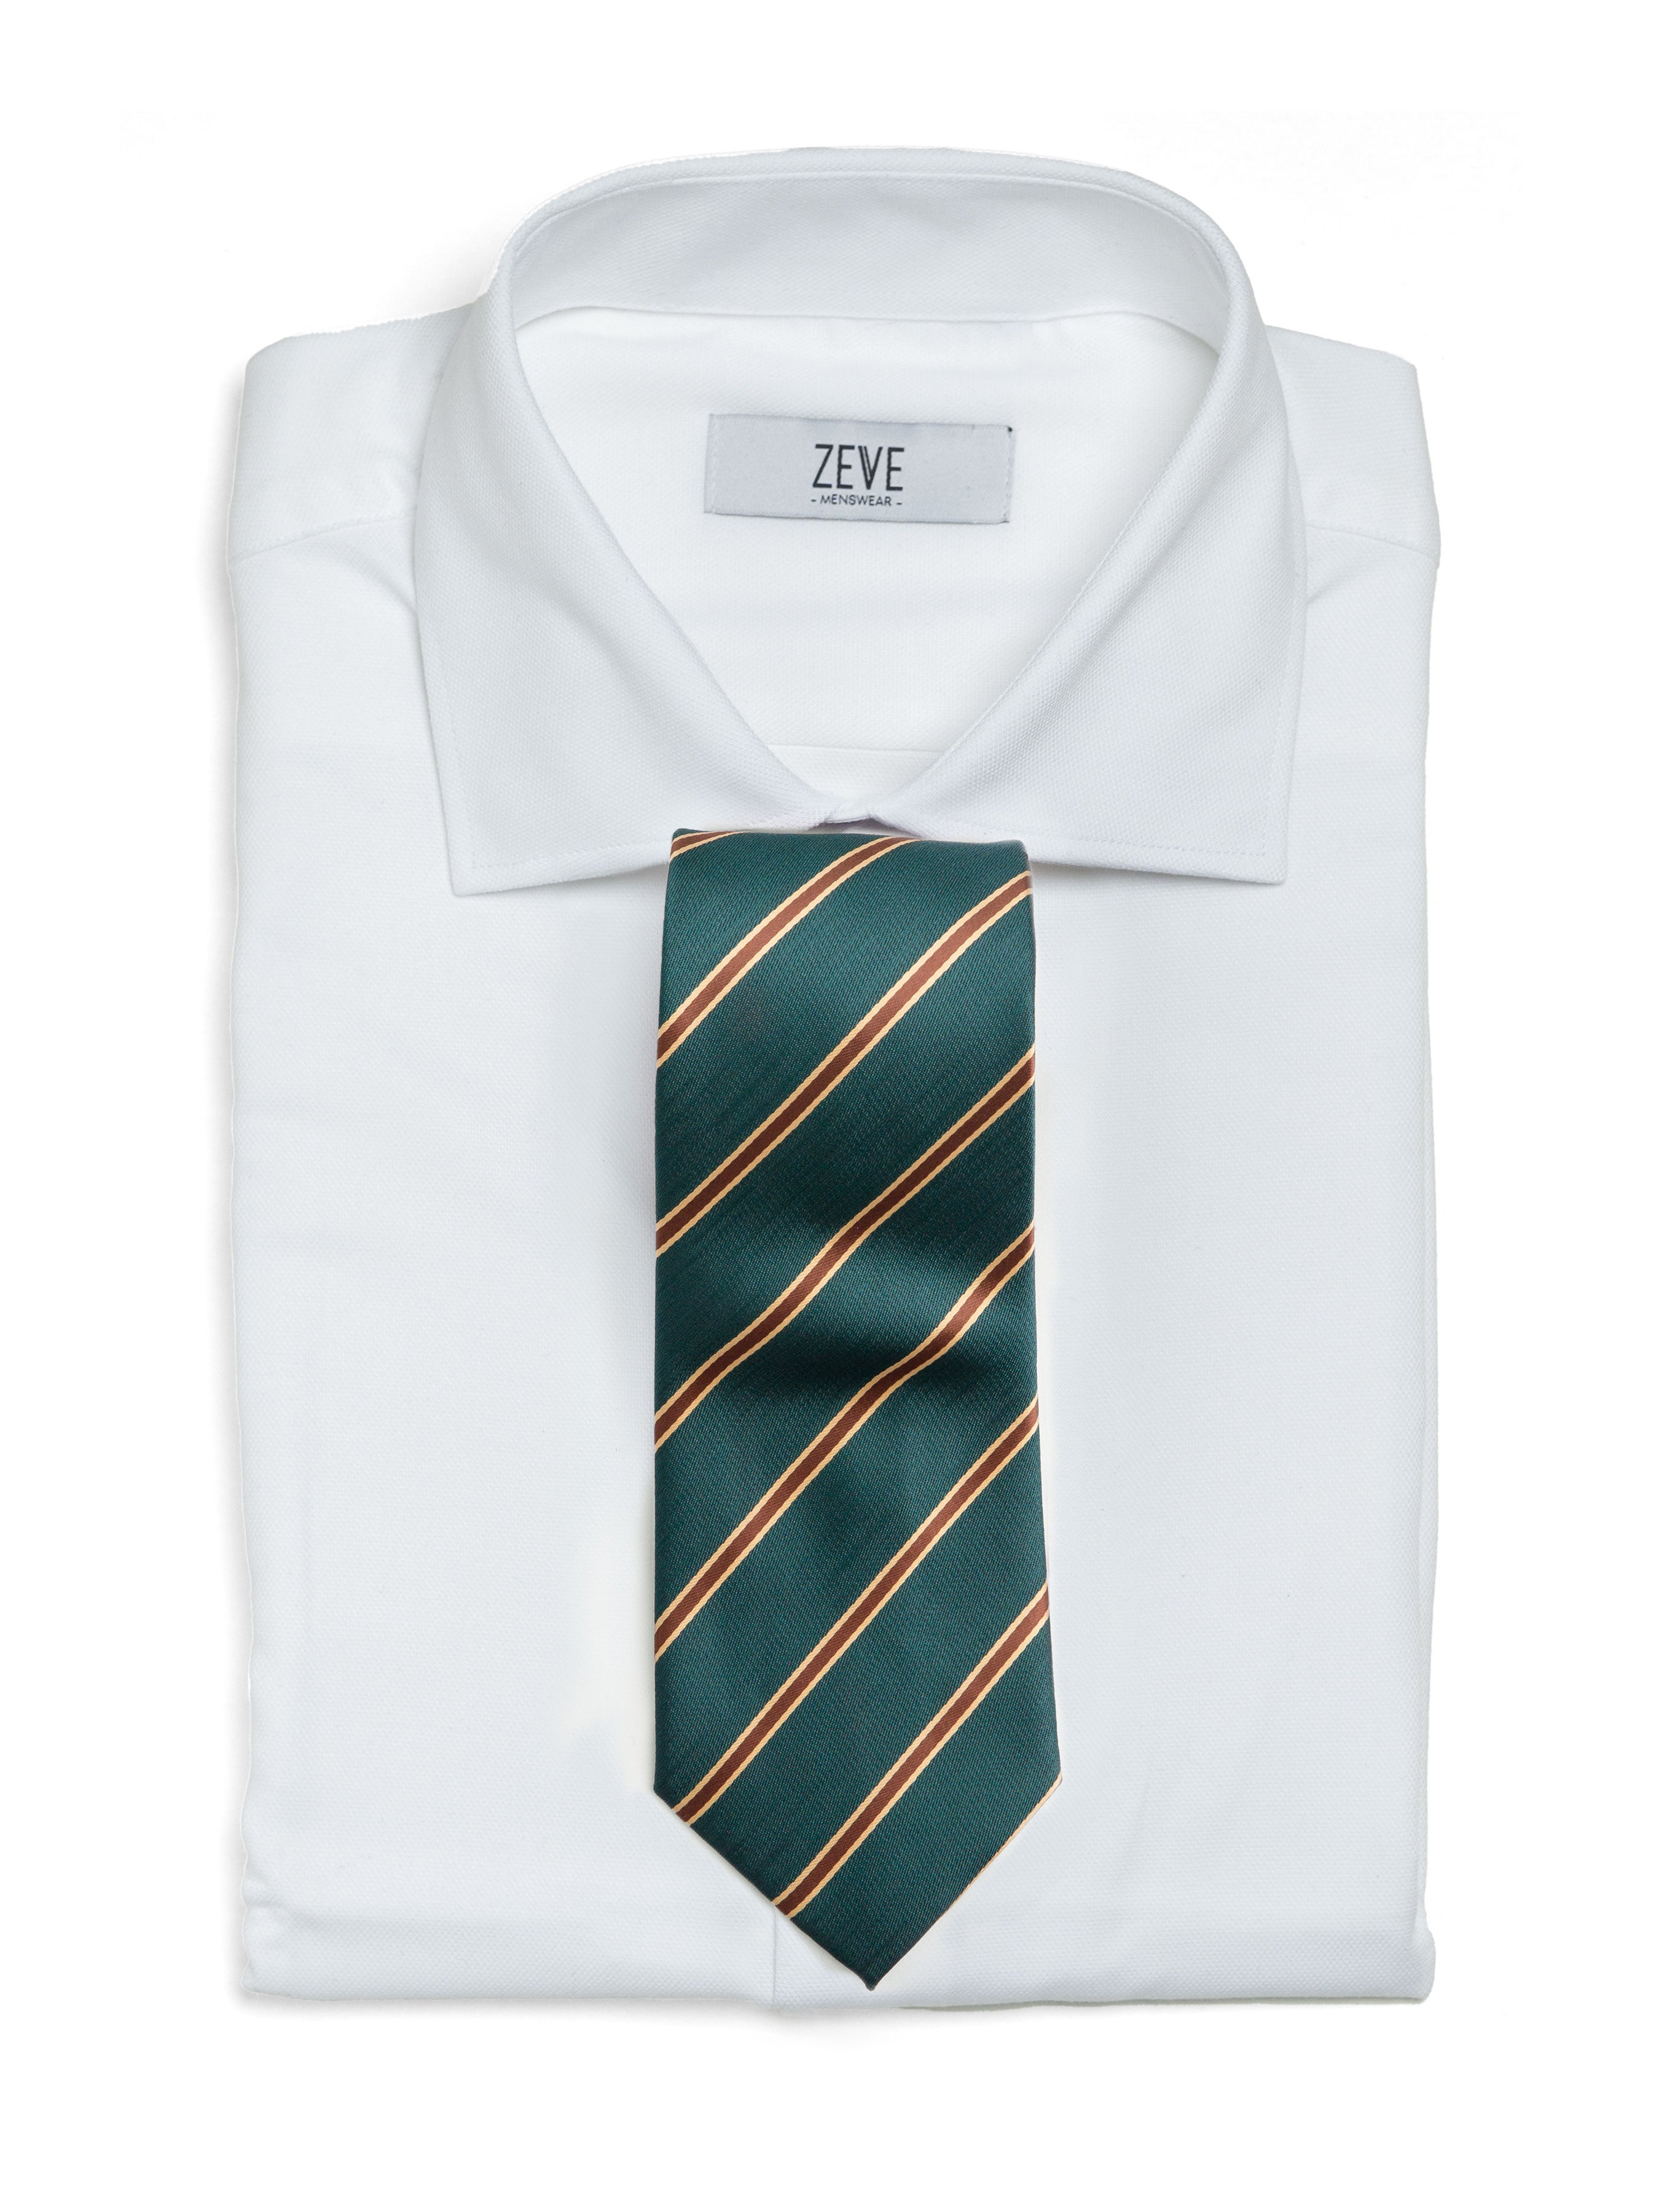 Stripes Tie - Emerald Green With Brown Line